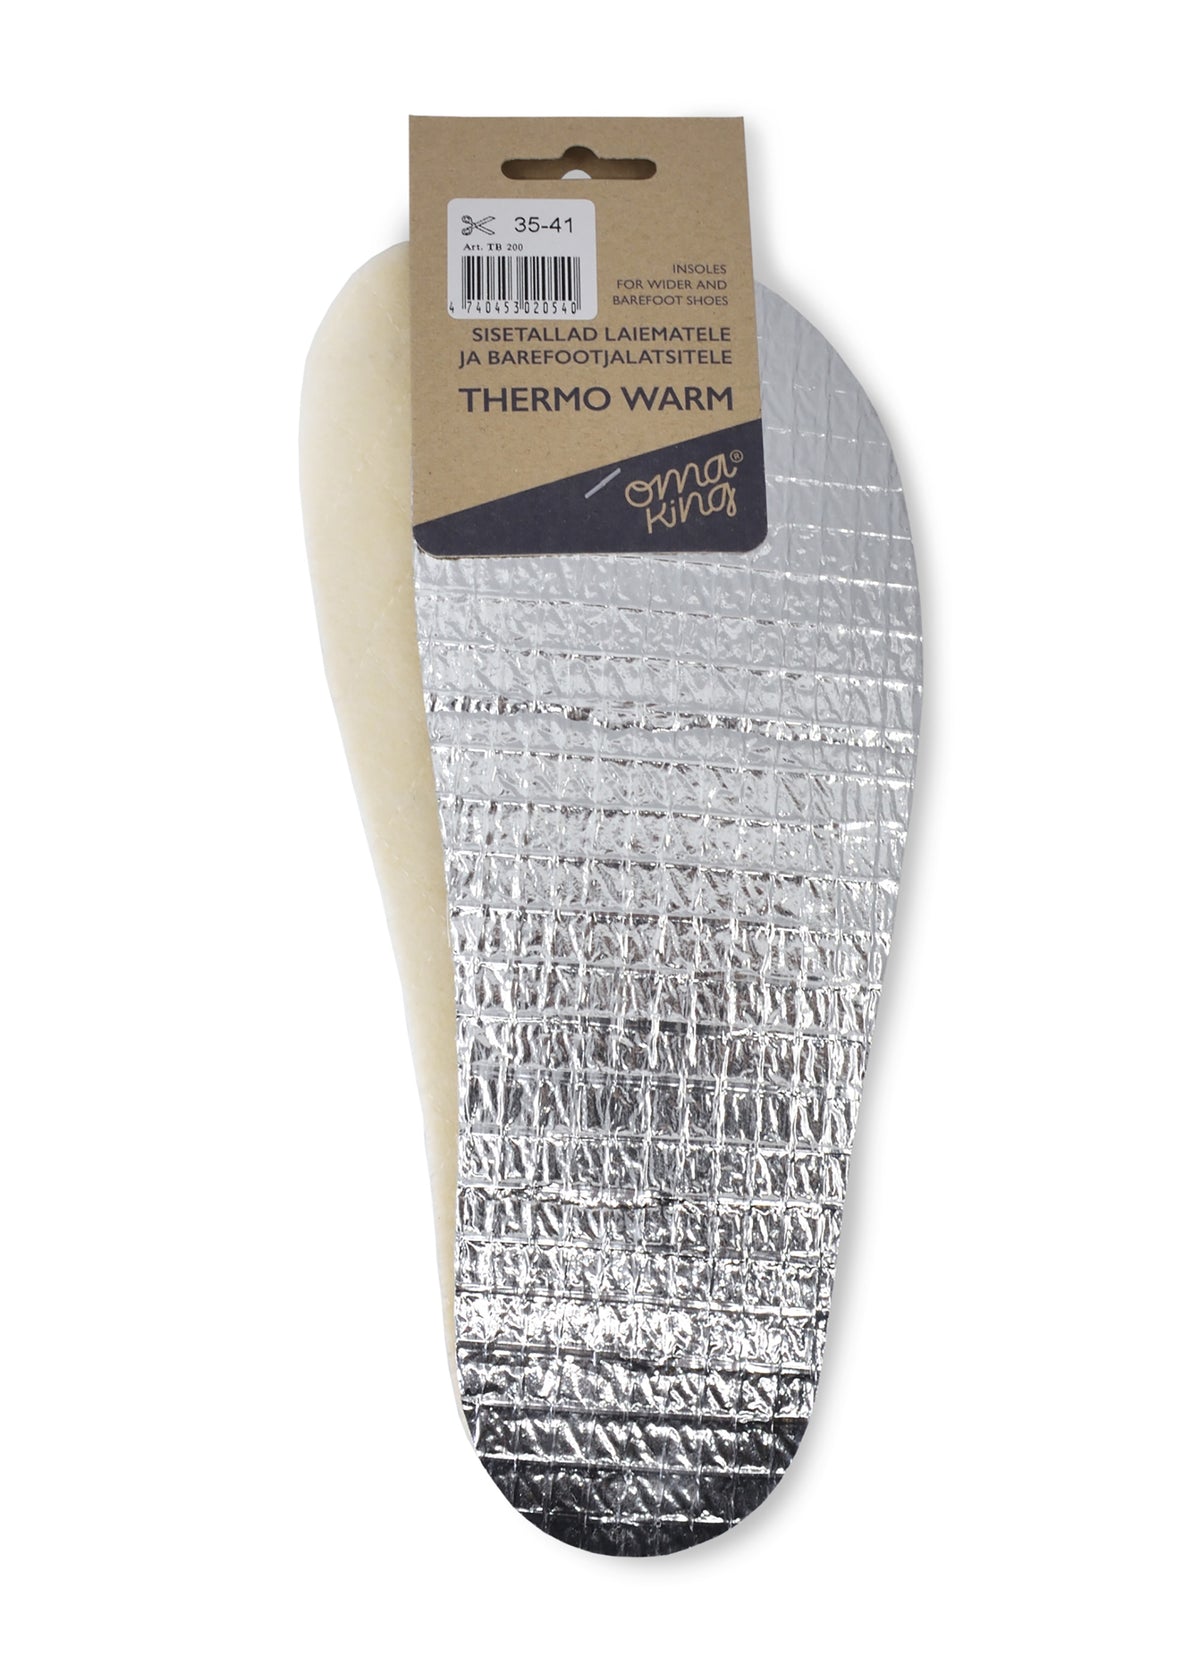 Thermo Warm insoles